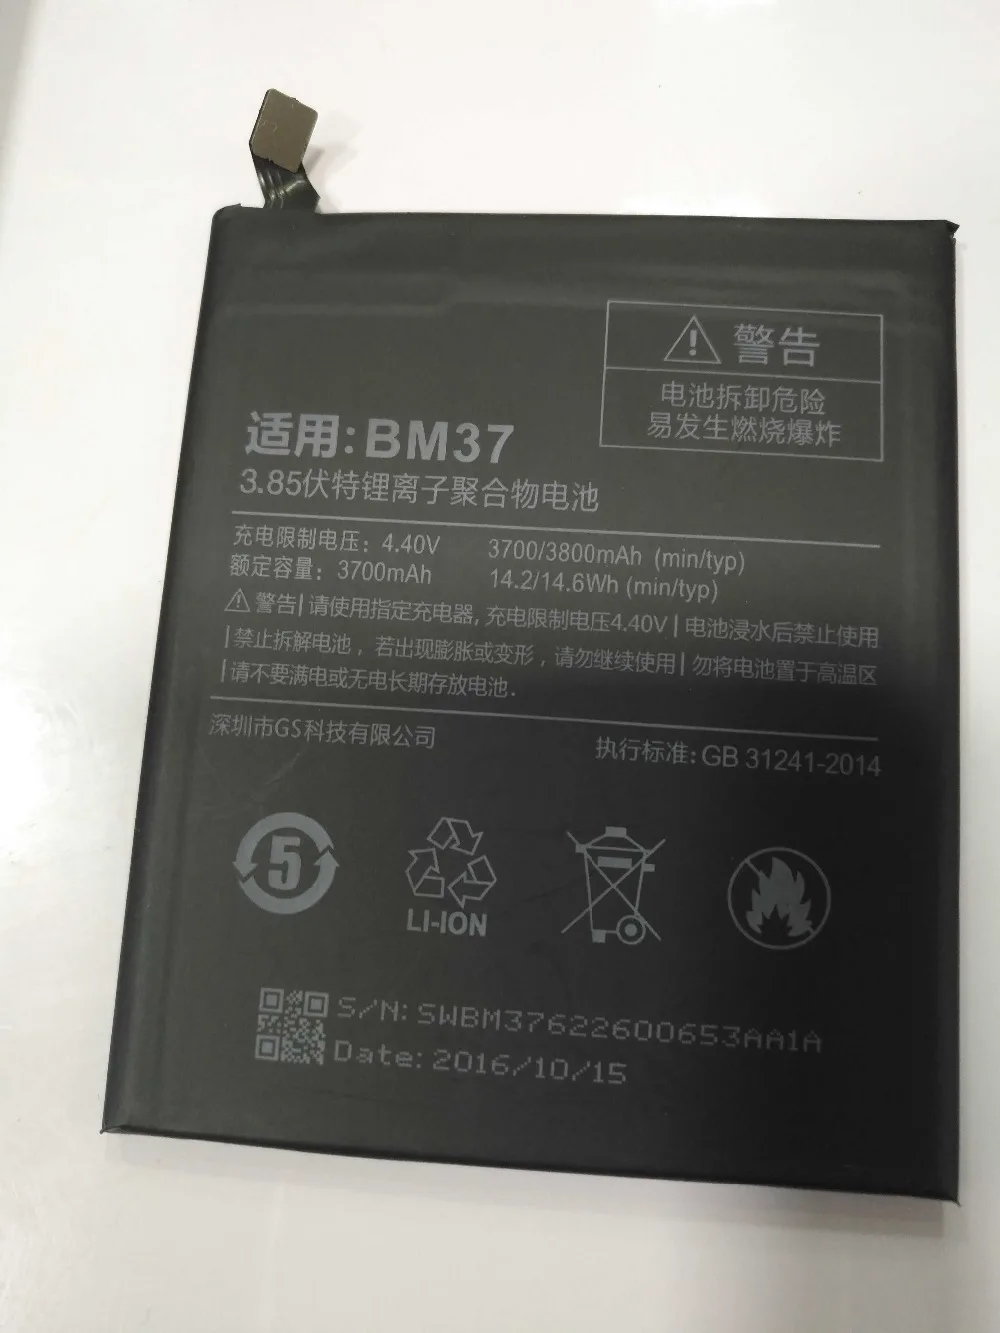 MATCHEASY For Xiaomi 5s Plus BM37 Battery 3700mAh 100% Original New Replacement accessory For Xiaomi 5s Plus CellPhone+Tool